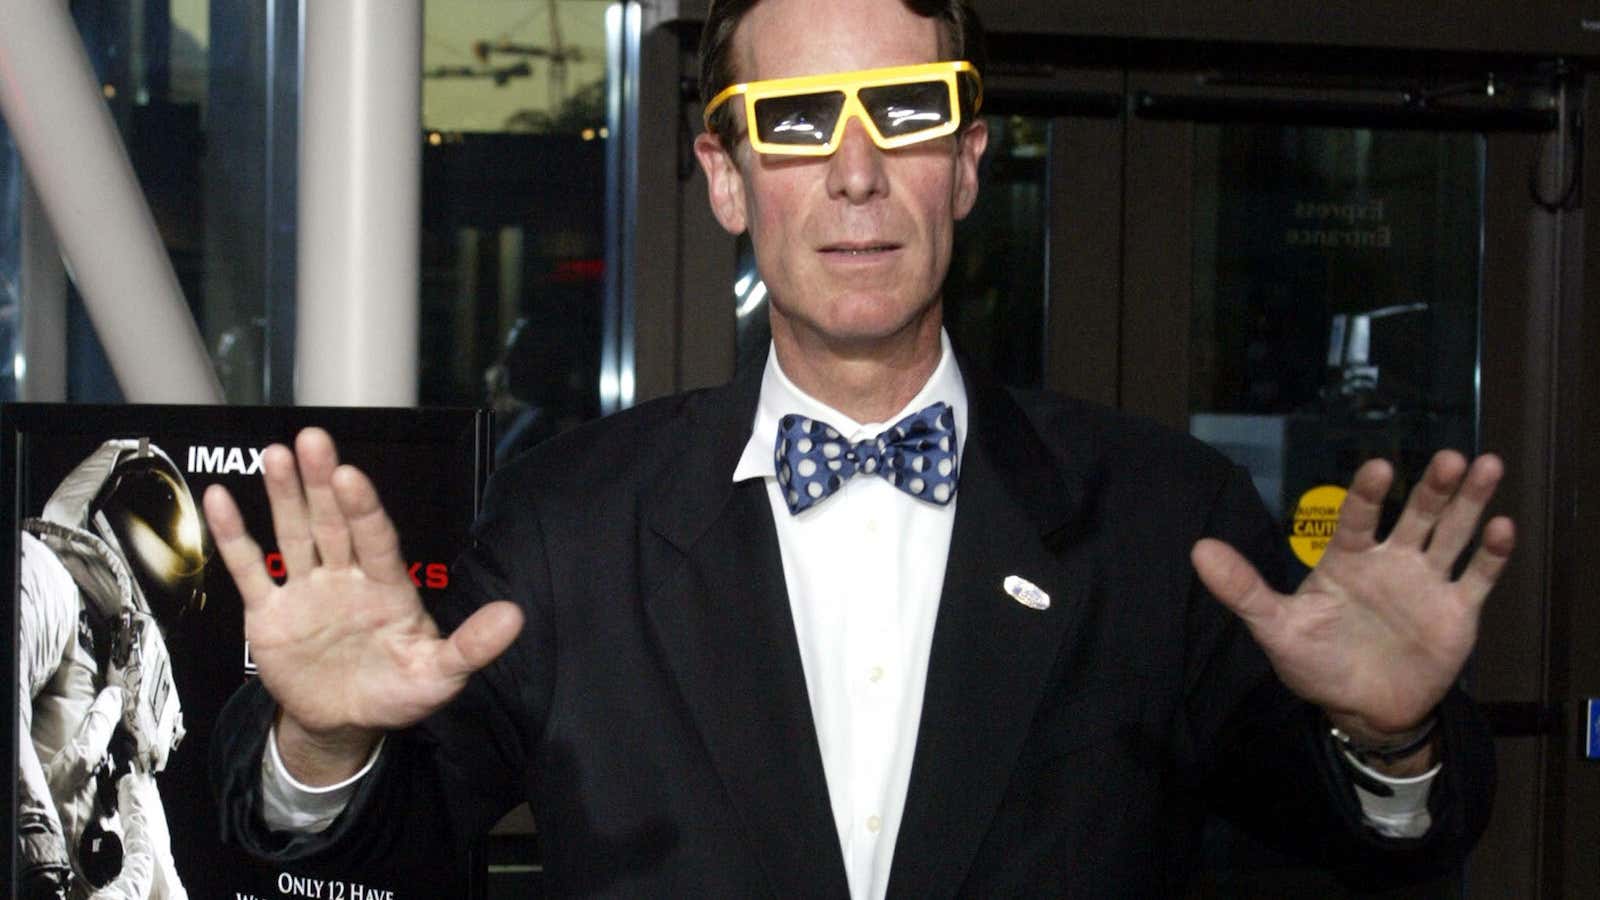 Bill Nye's New Theme Song Comes From Tyler, the Creator